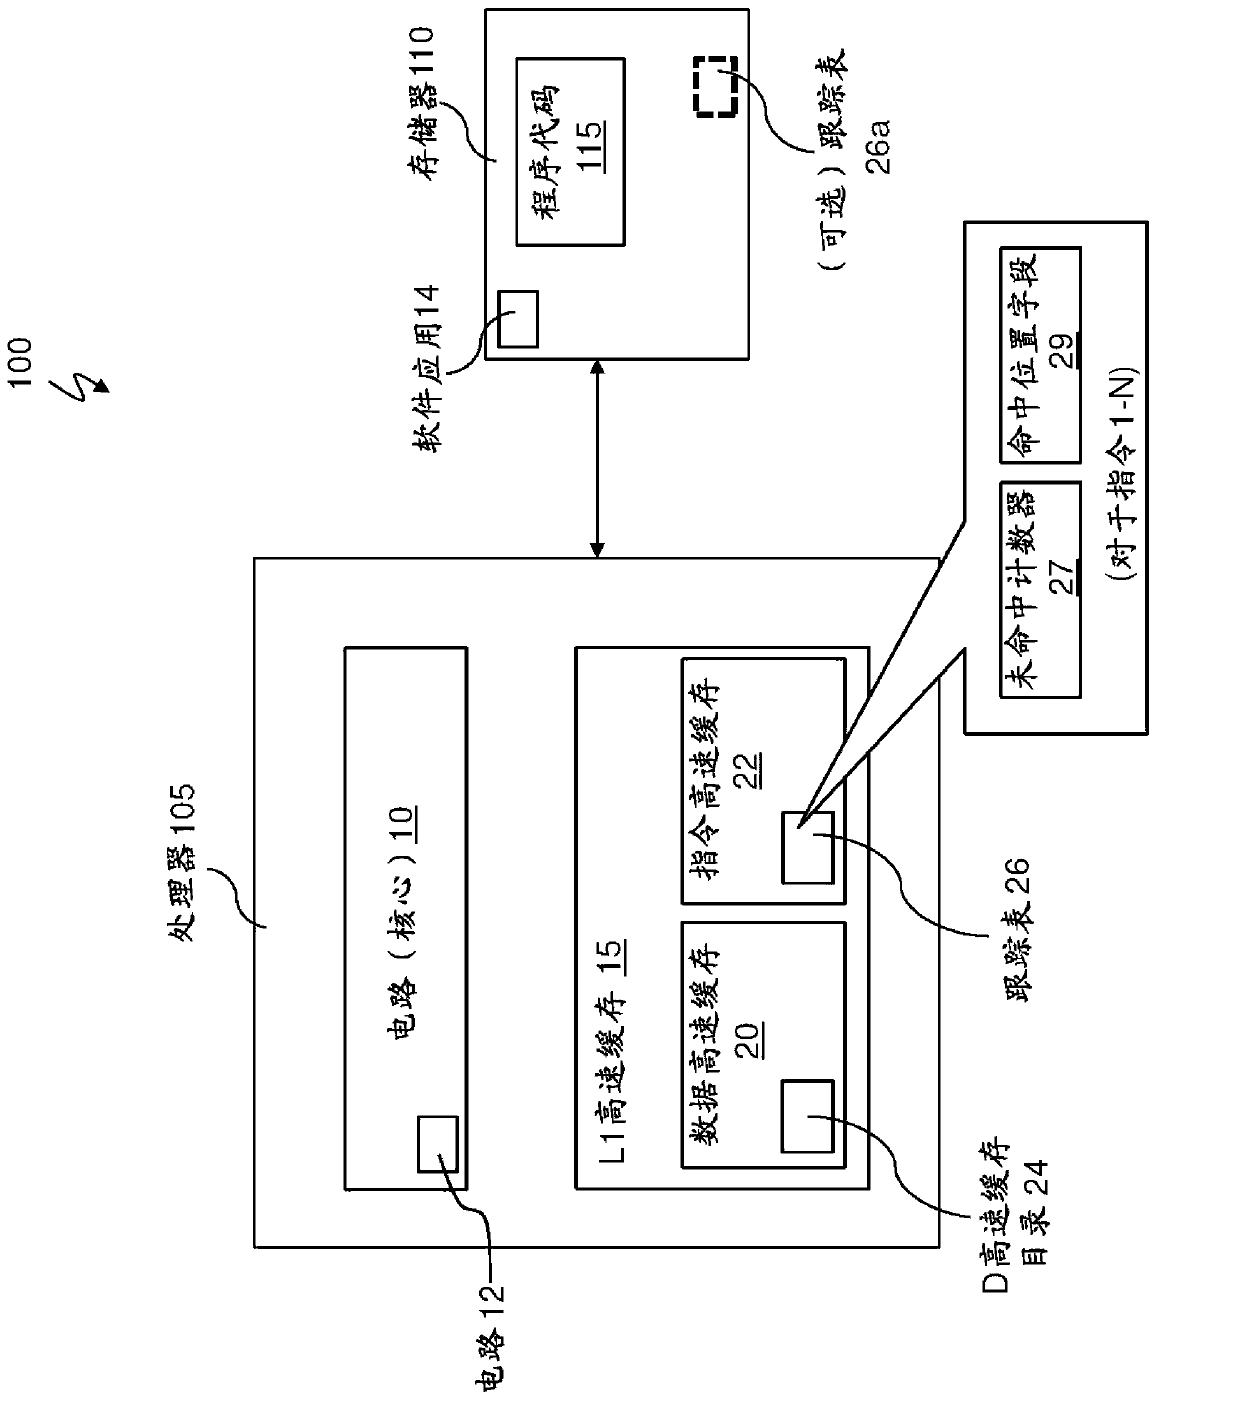 Method and system for determining cache set replacement order based on temporal set recording